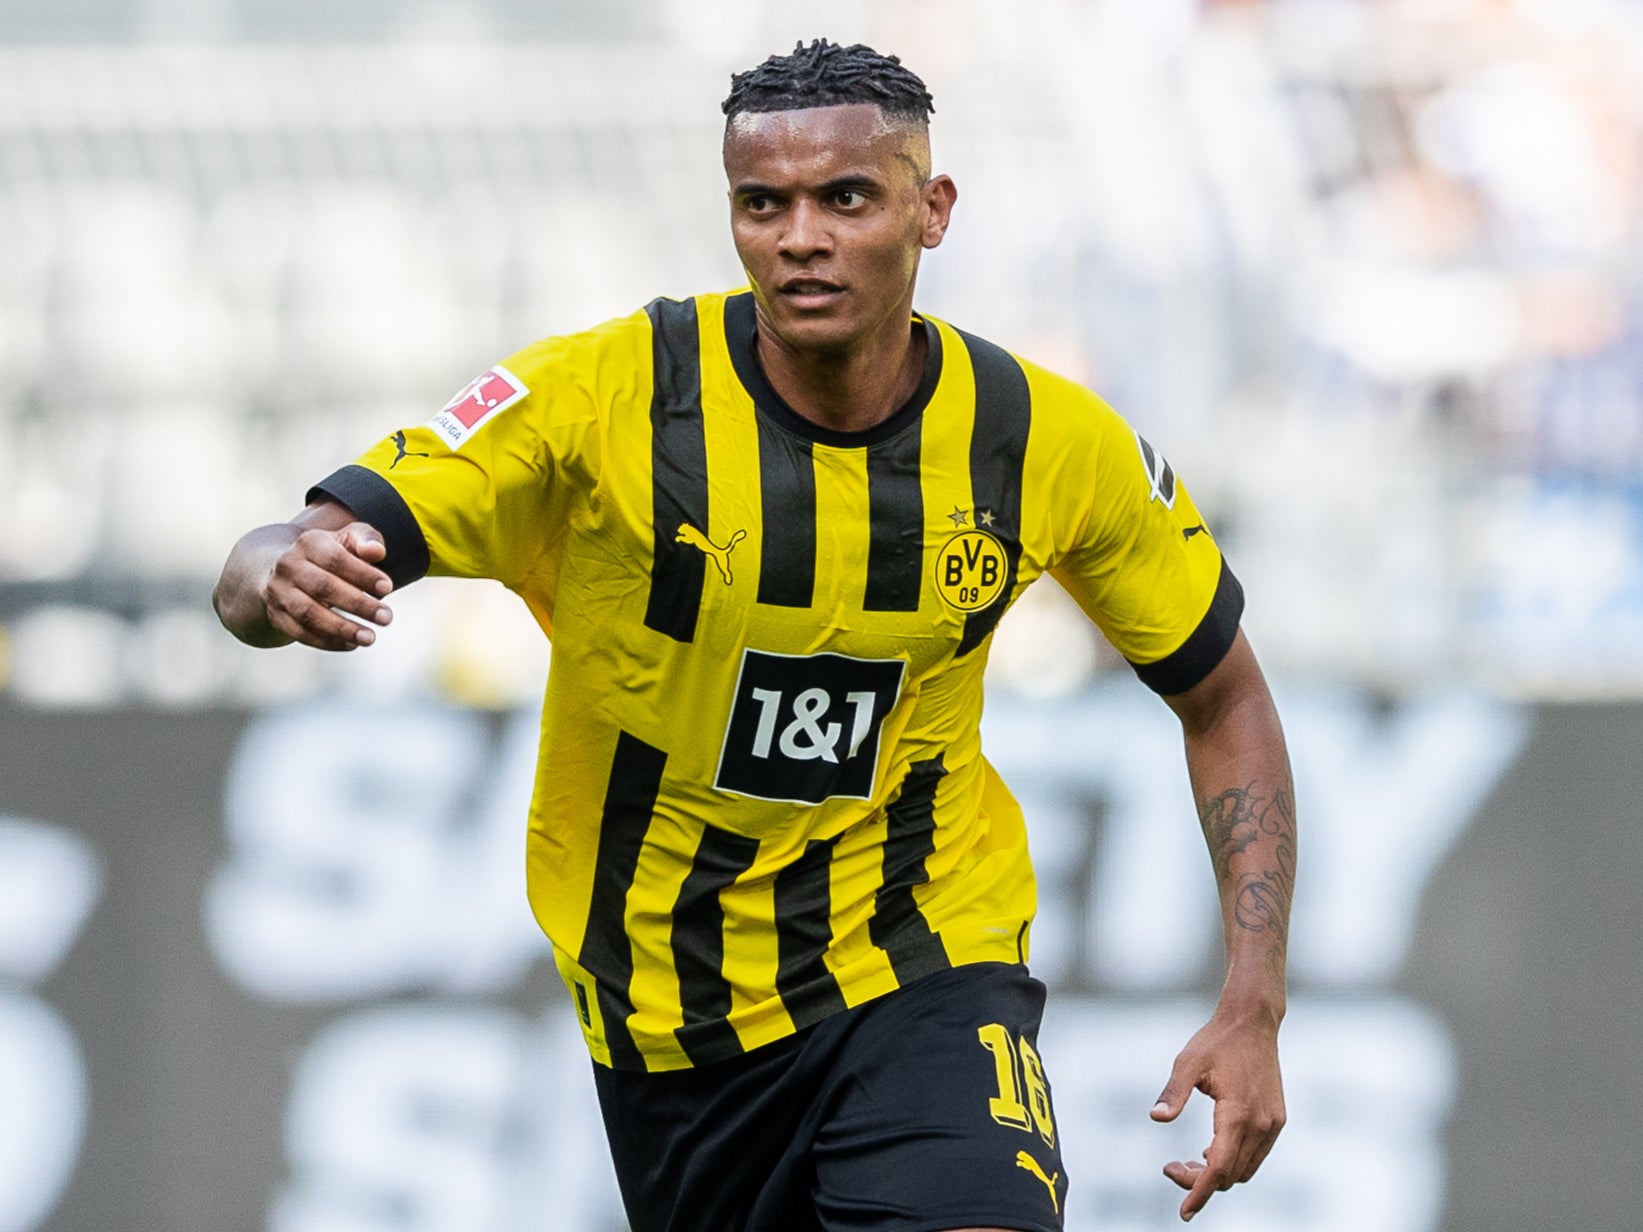  Manuel Akanji, a Swiss professional soccer player who plays for Bundesliga club Borussia Dortmund and the Switzerland national team, is seen playing soccer.